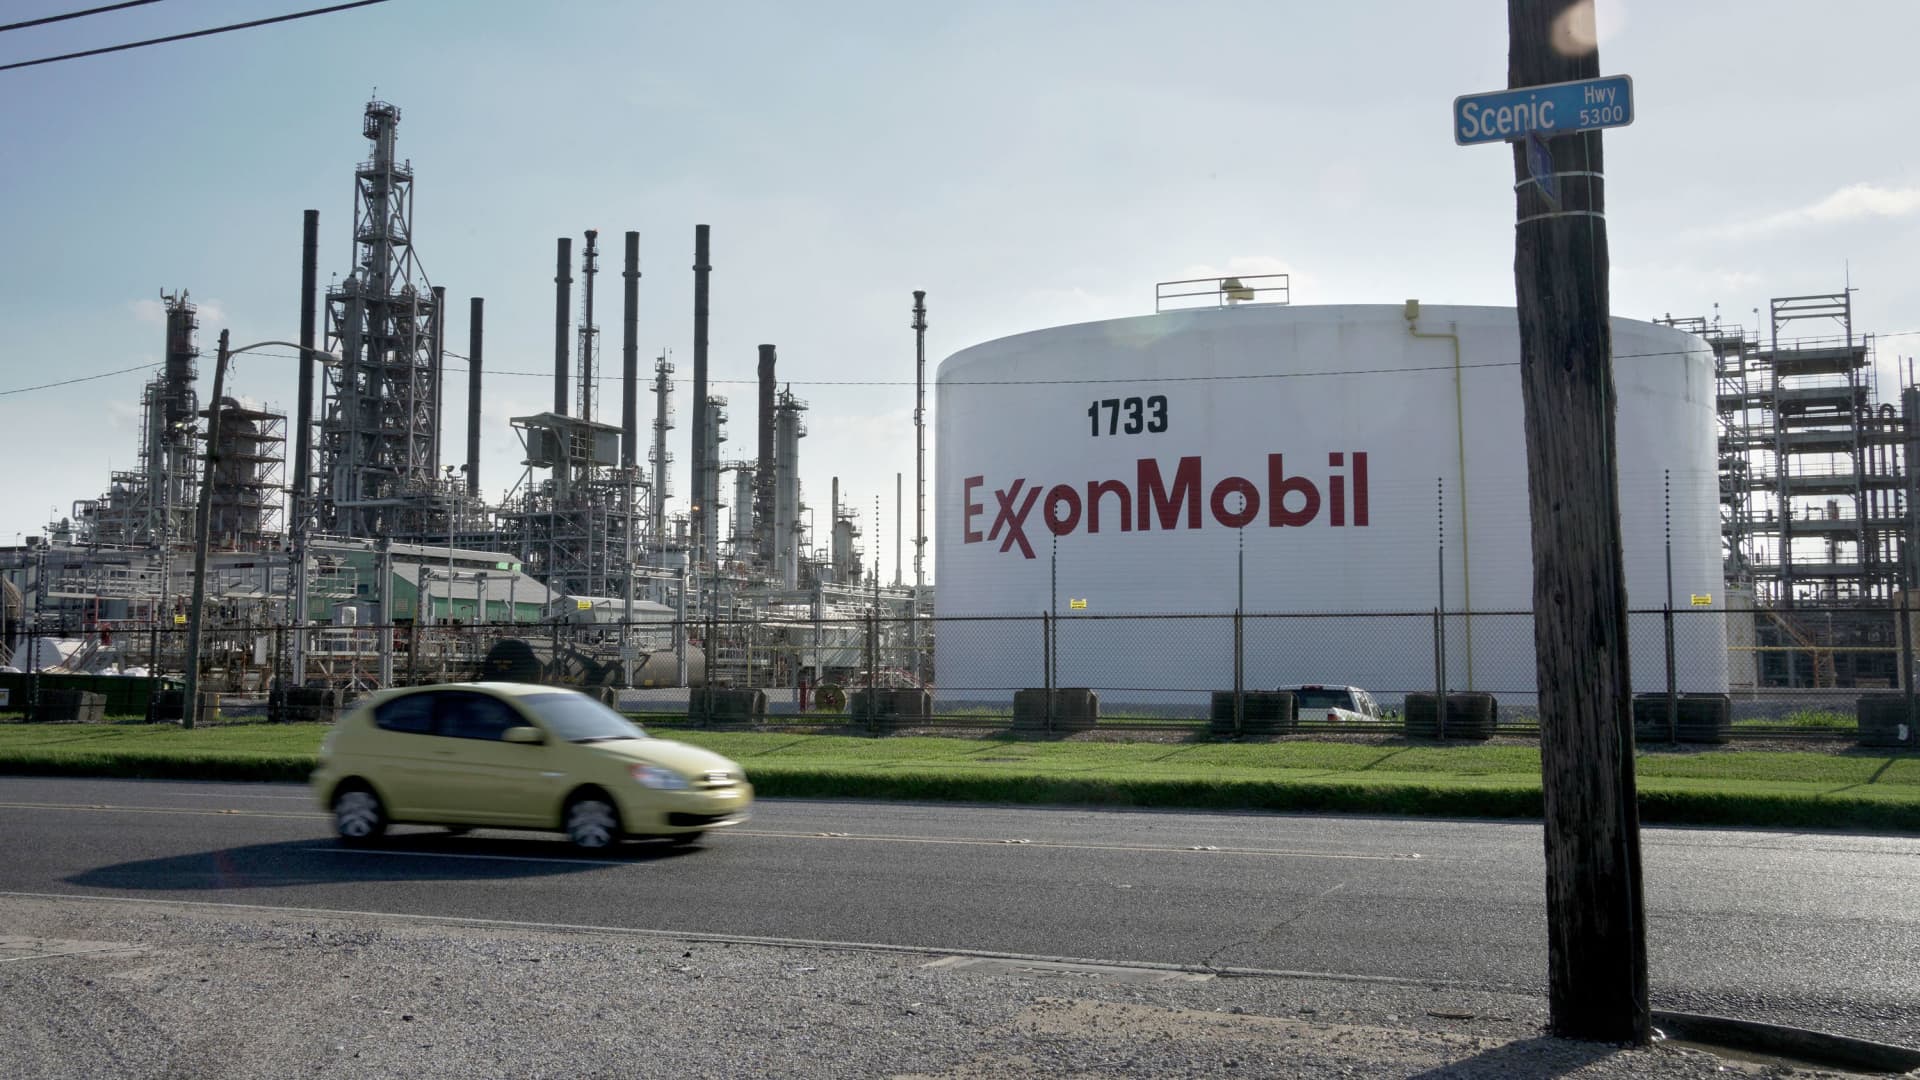 A view of the ExxonMobil Baton Rouge Refinery in Baton Rouge, Louisiana, May 15, 2021.